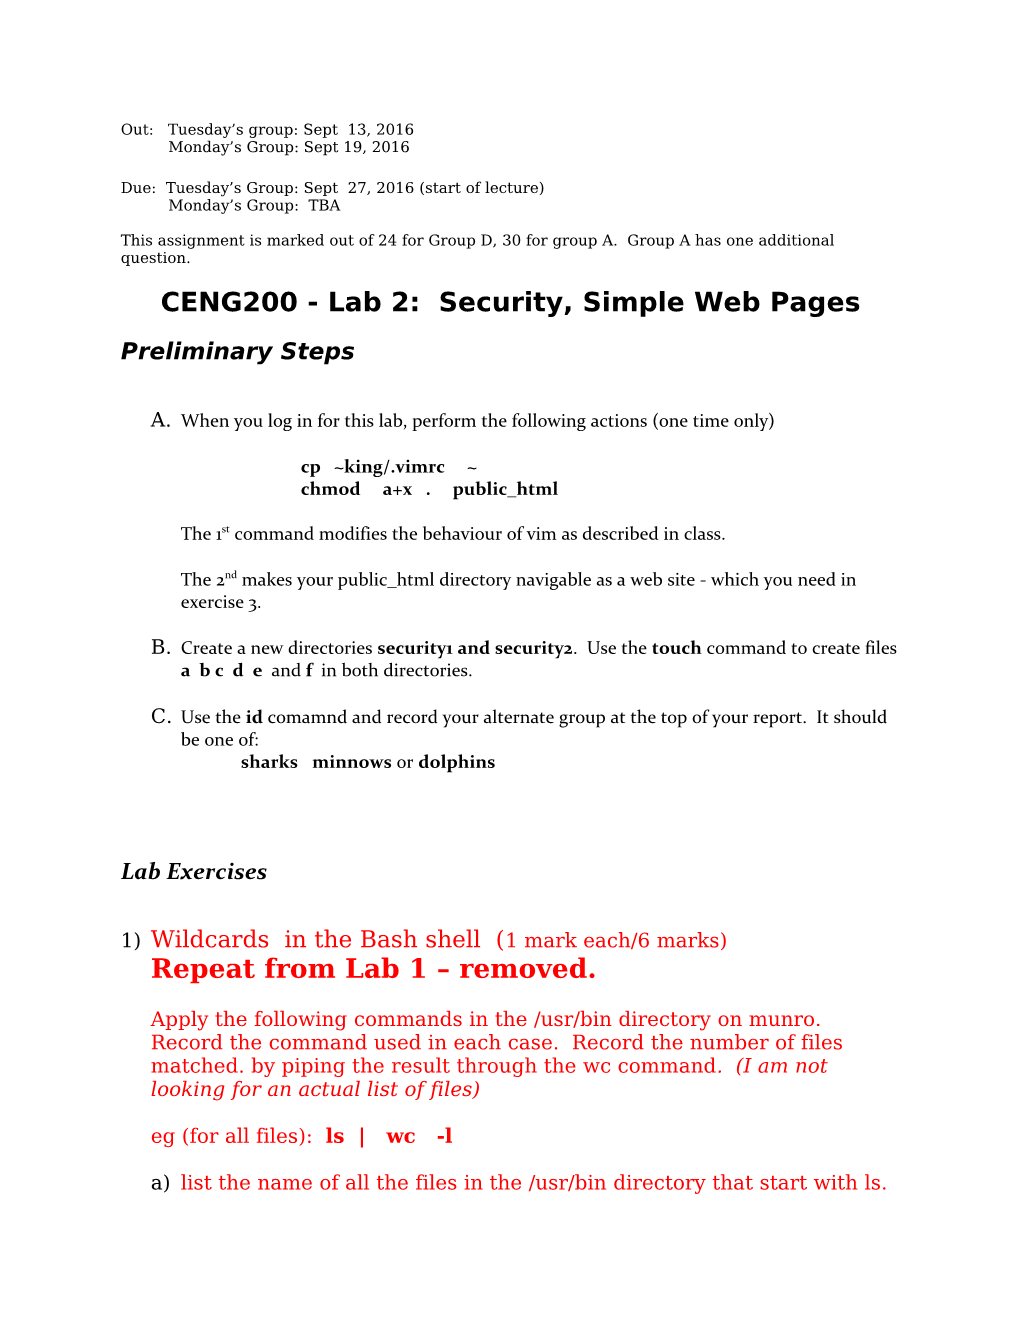 CENG200 - Lab 2: Security, Simple Web Pages